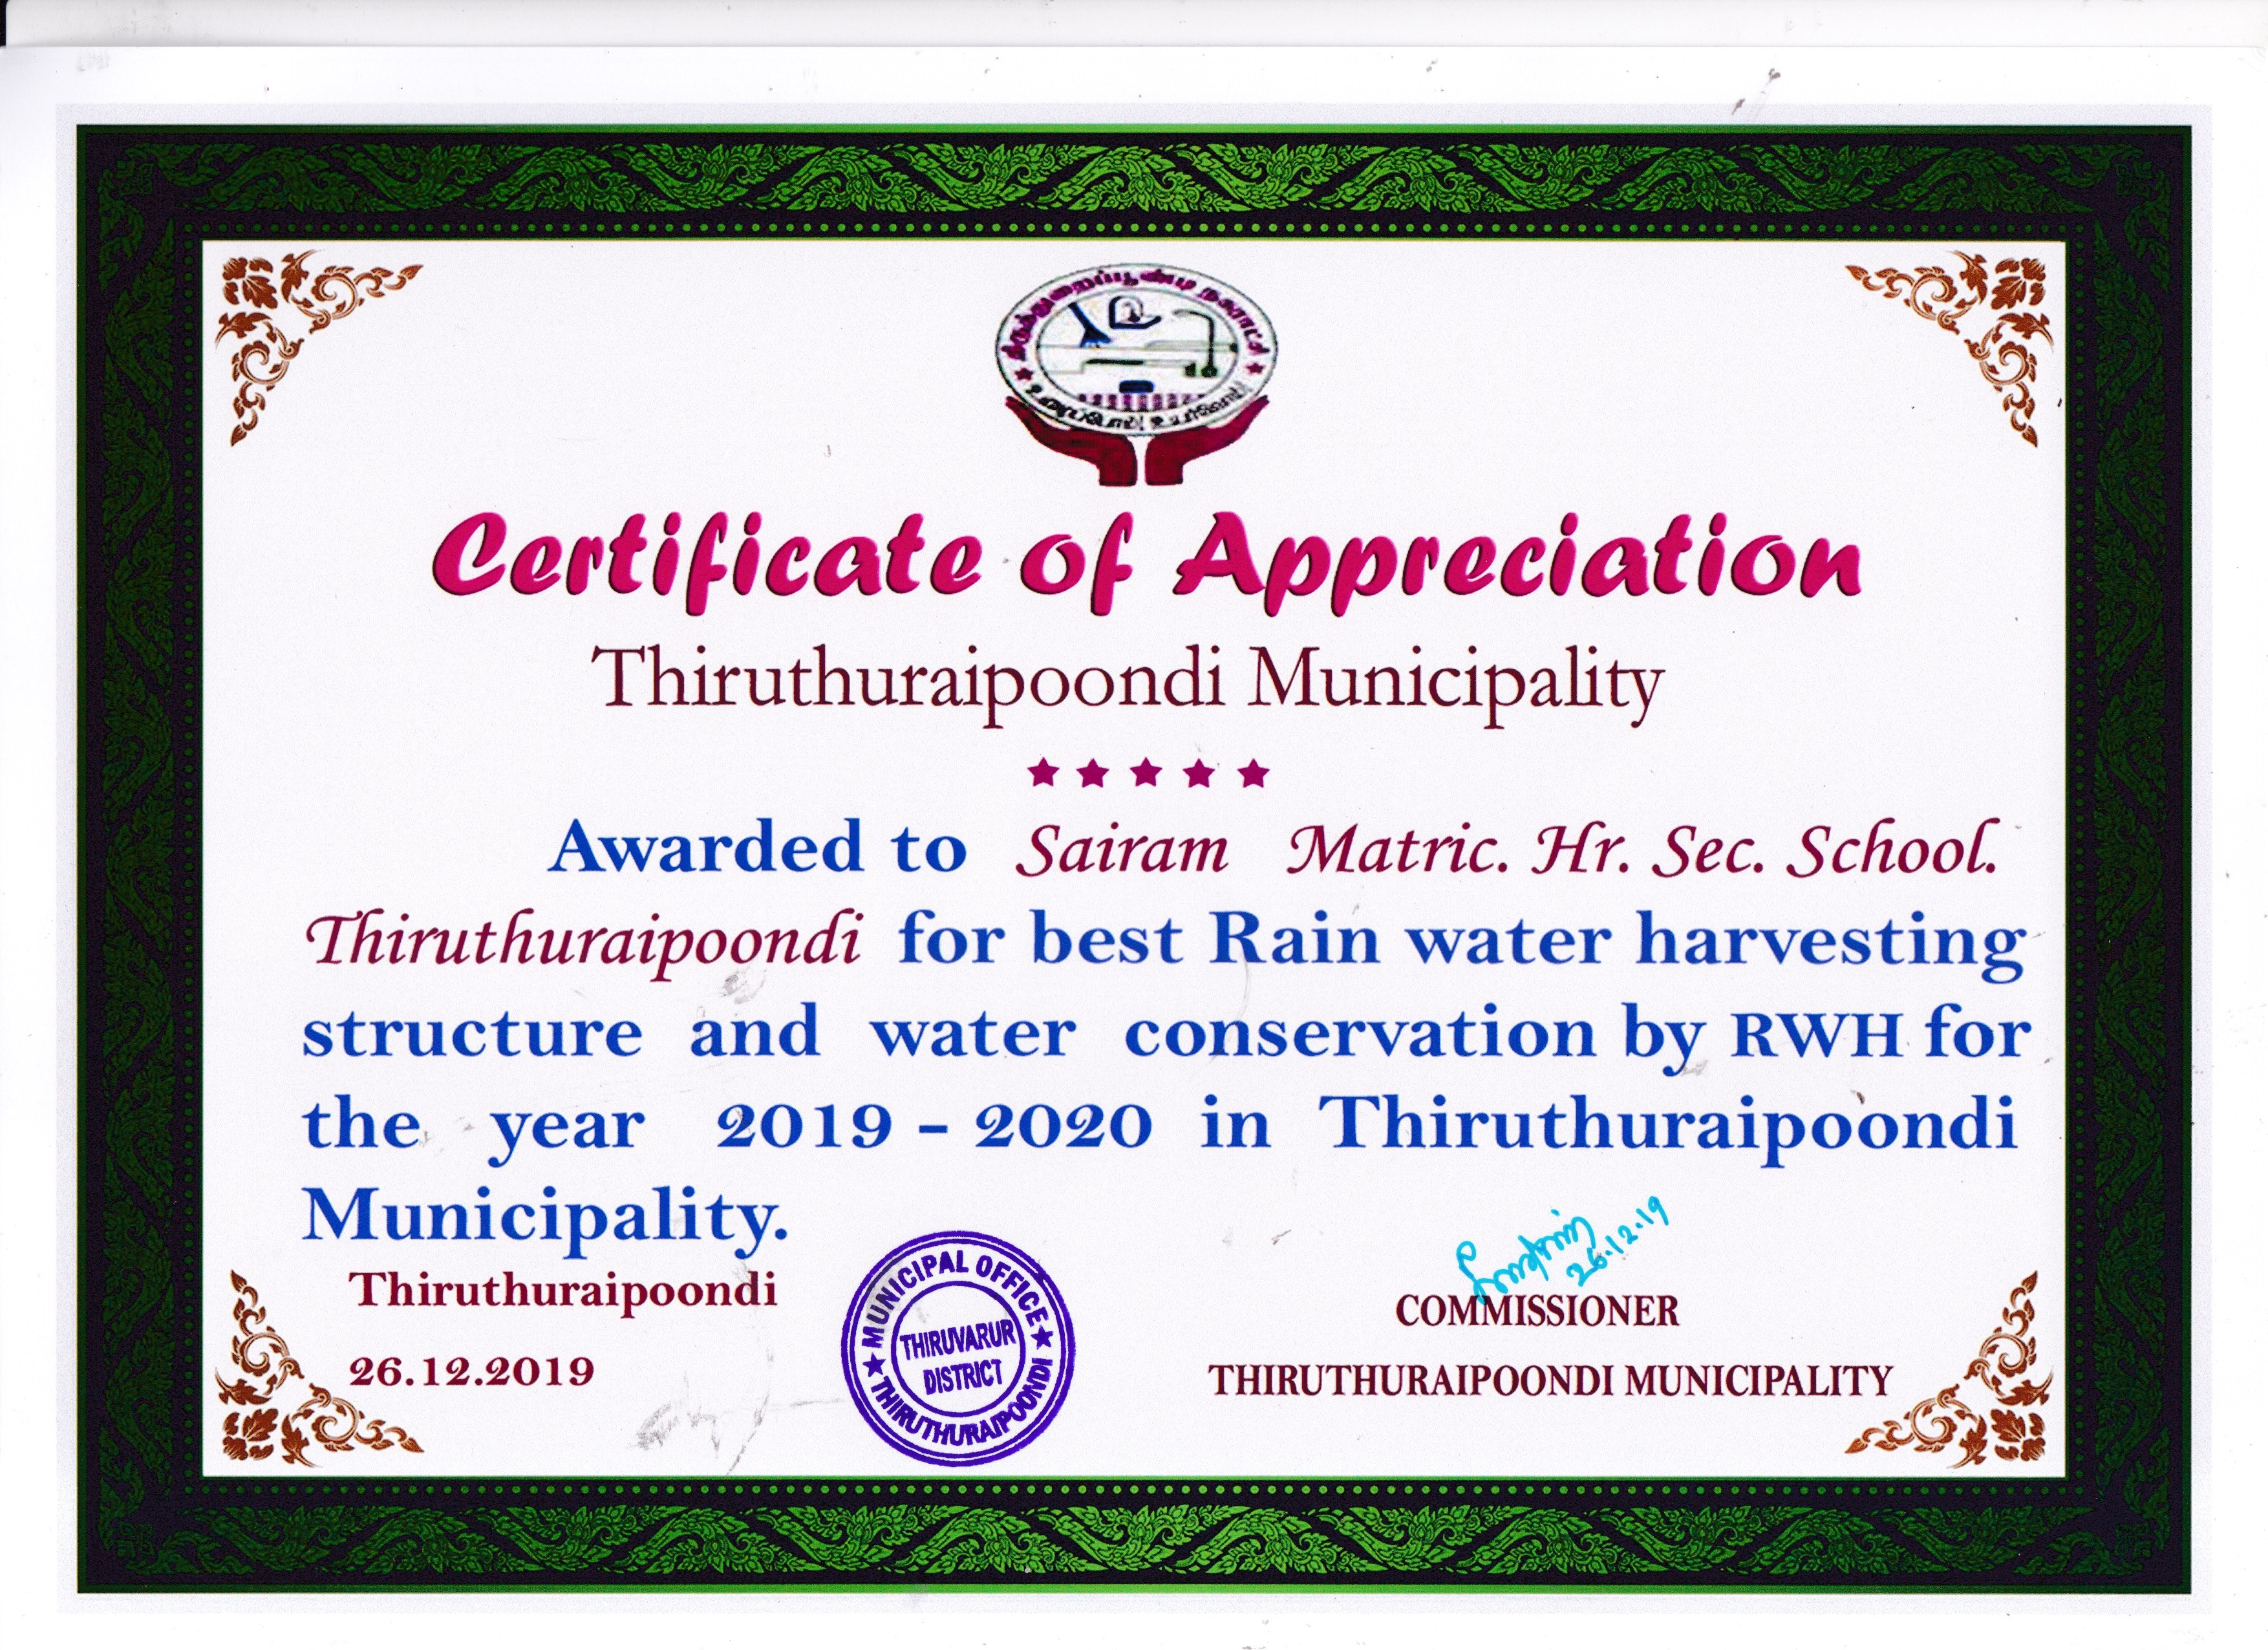 Our school  is awarded appreciation for best Rain water Harvesting structure in school for the year 2019-20